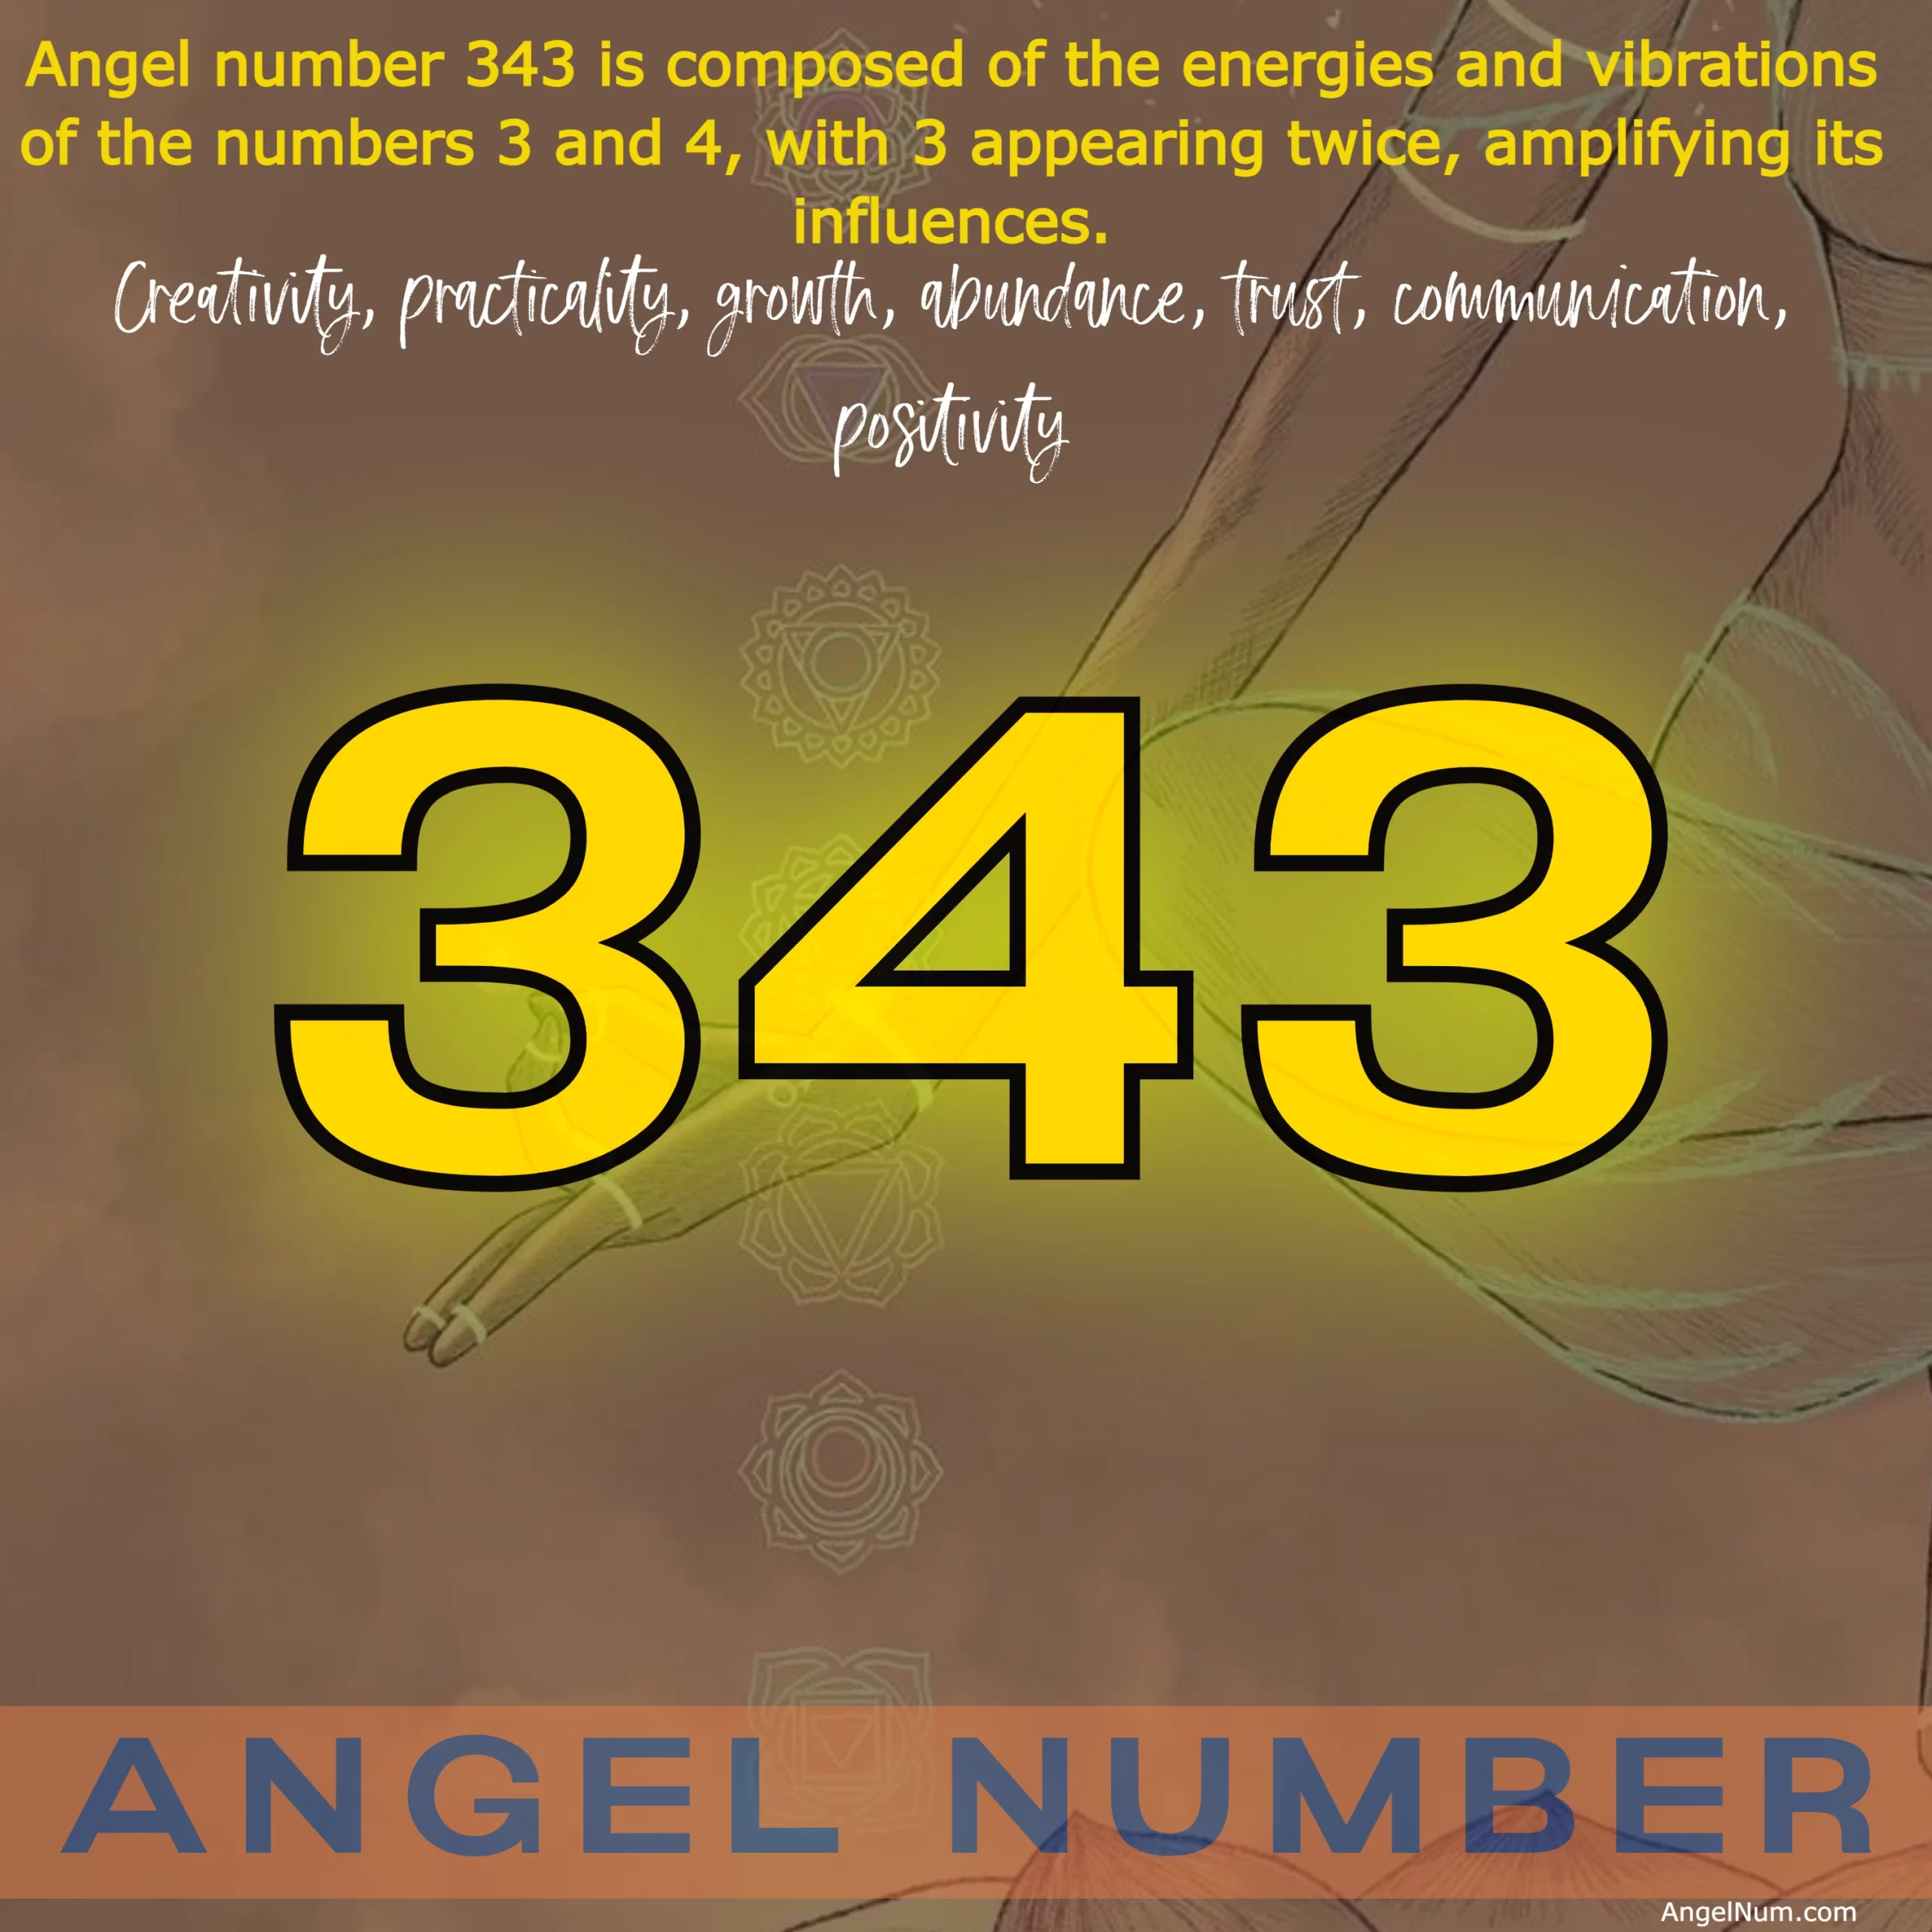 Discovering the Spiritual Significance of Angel Number 343